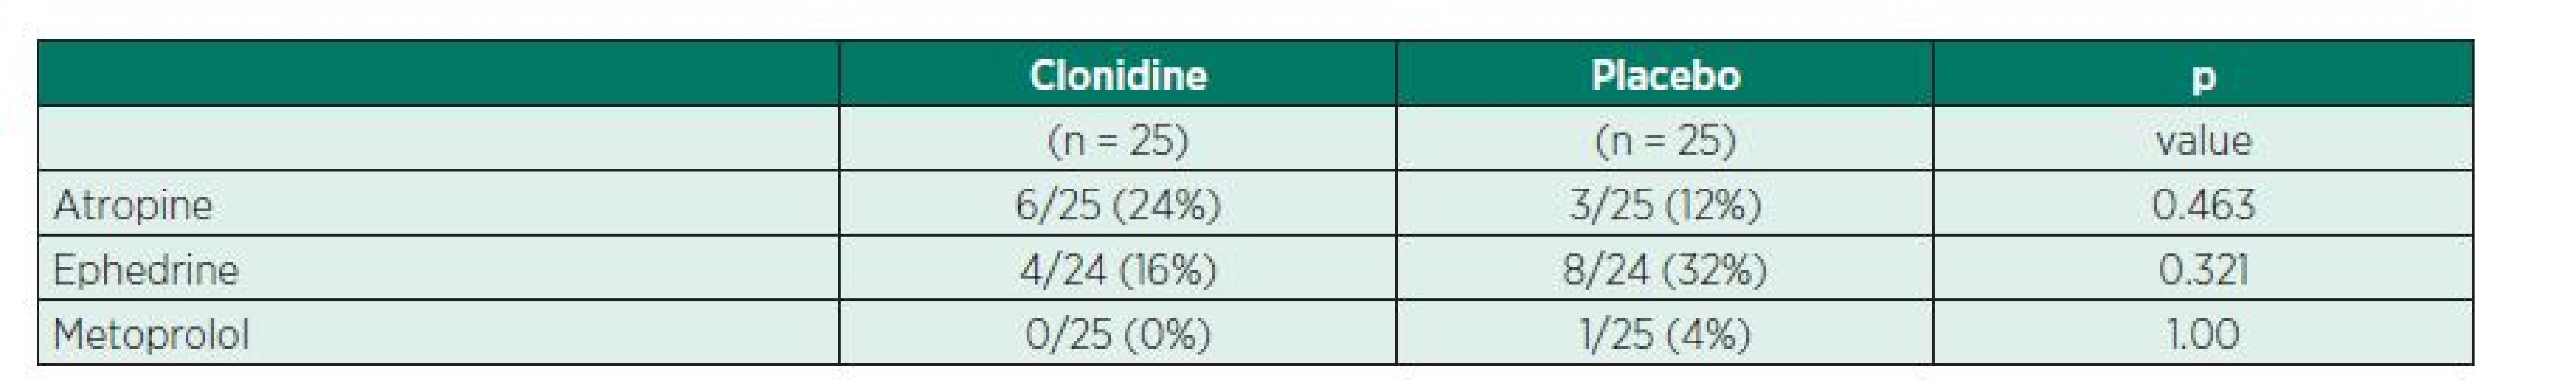 Use of emergency drugs in clonidine or placebo group